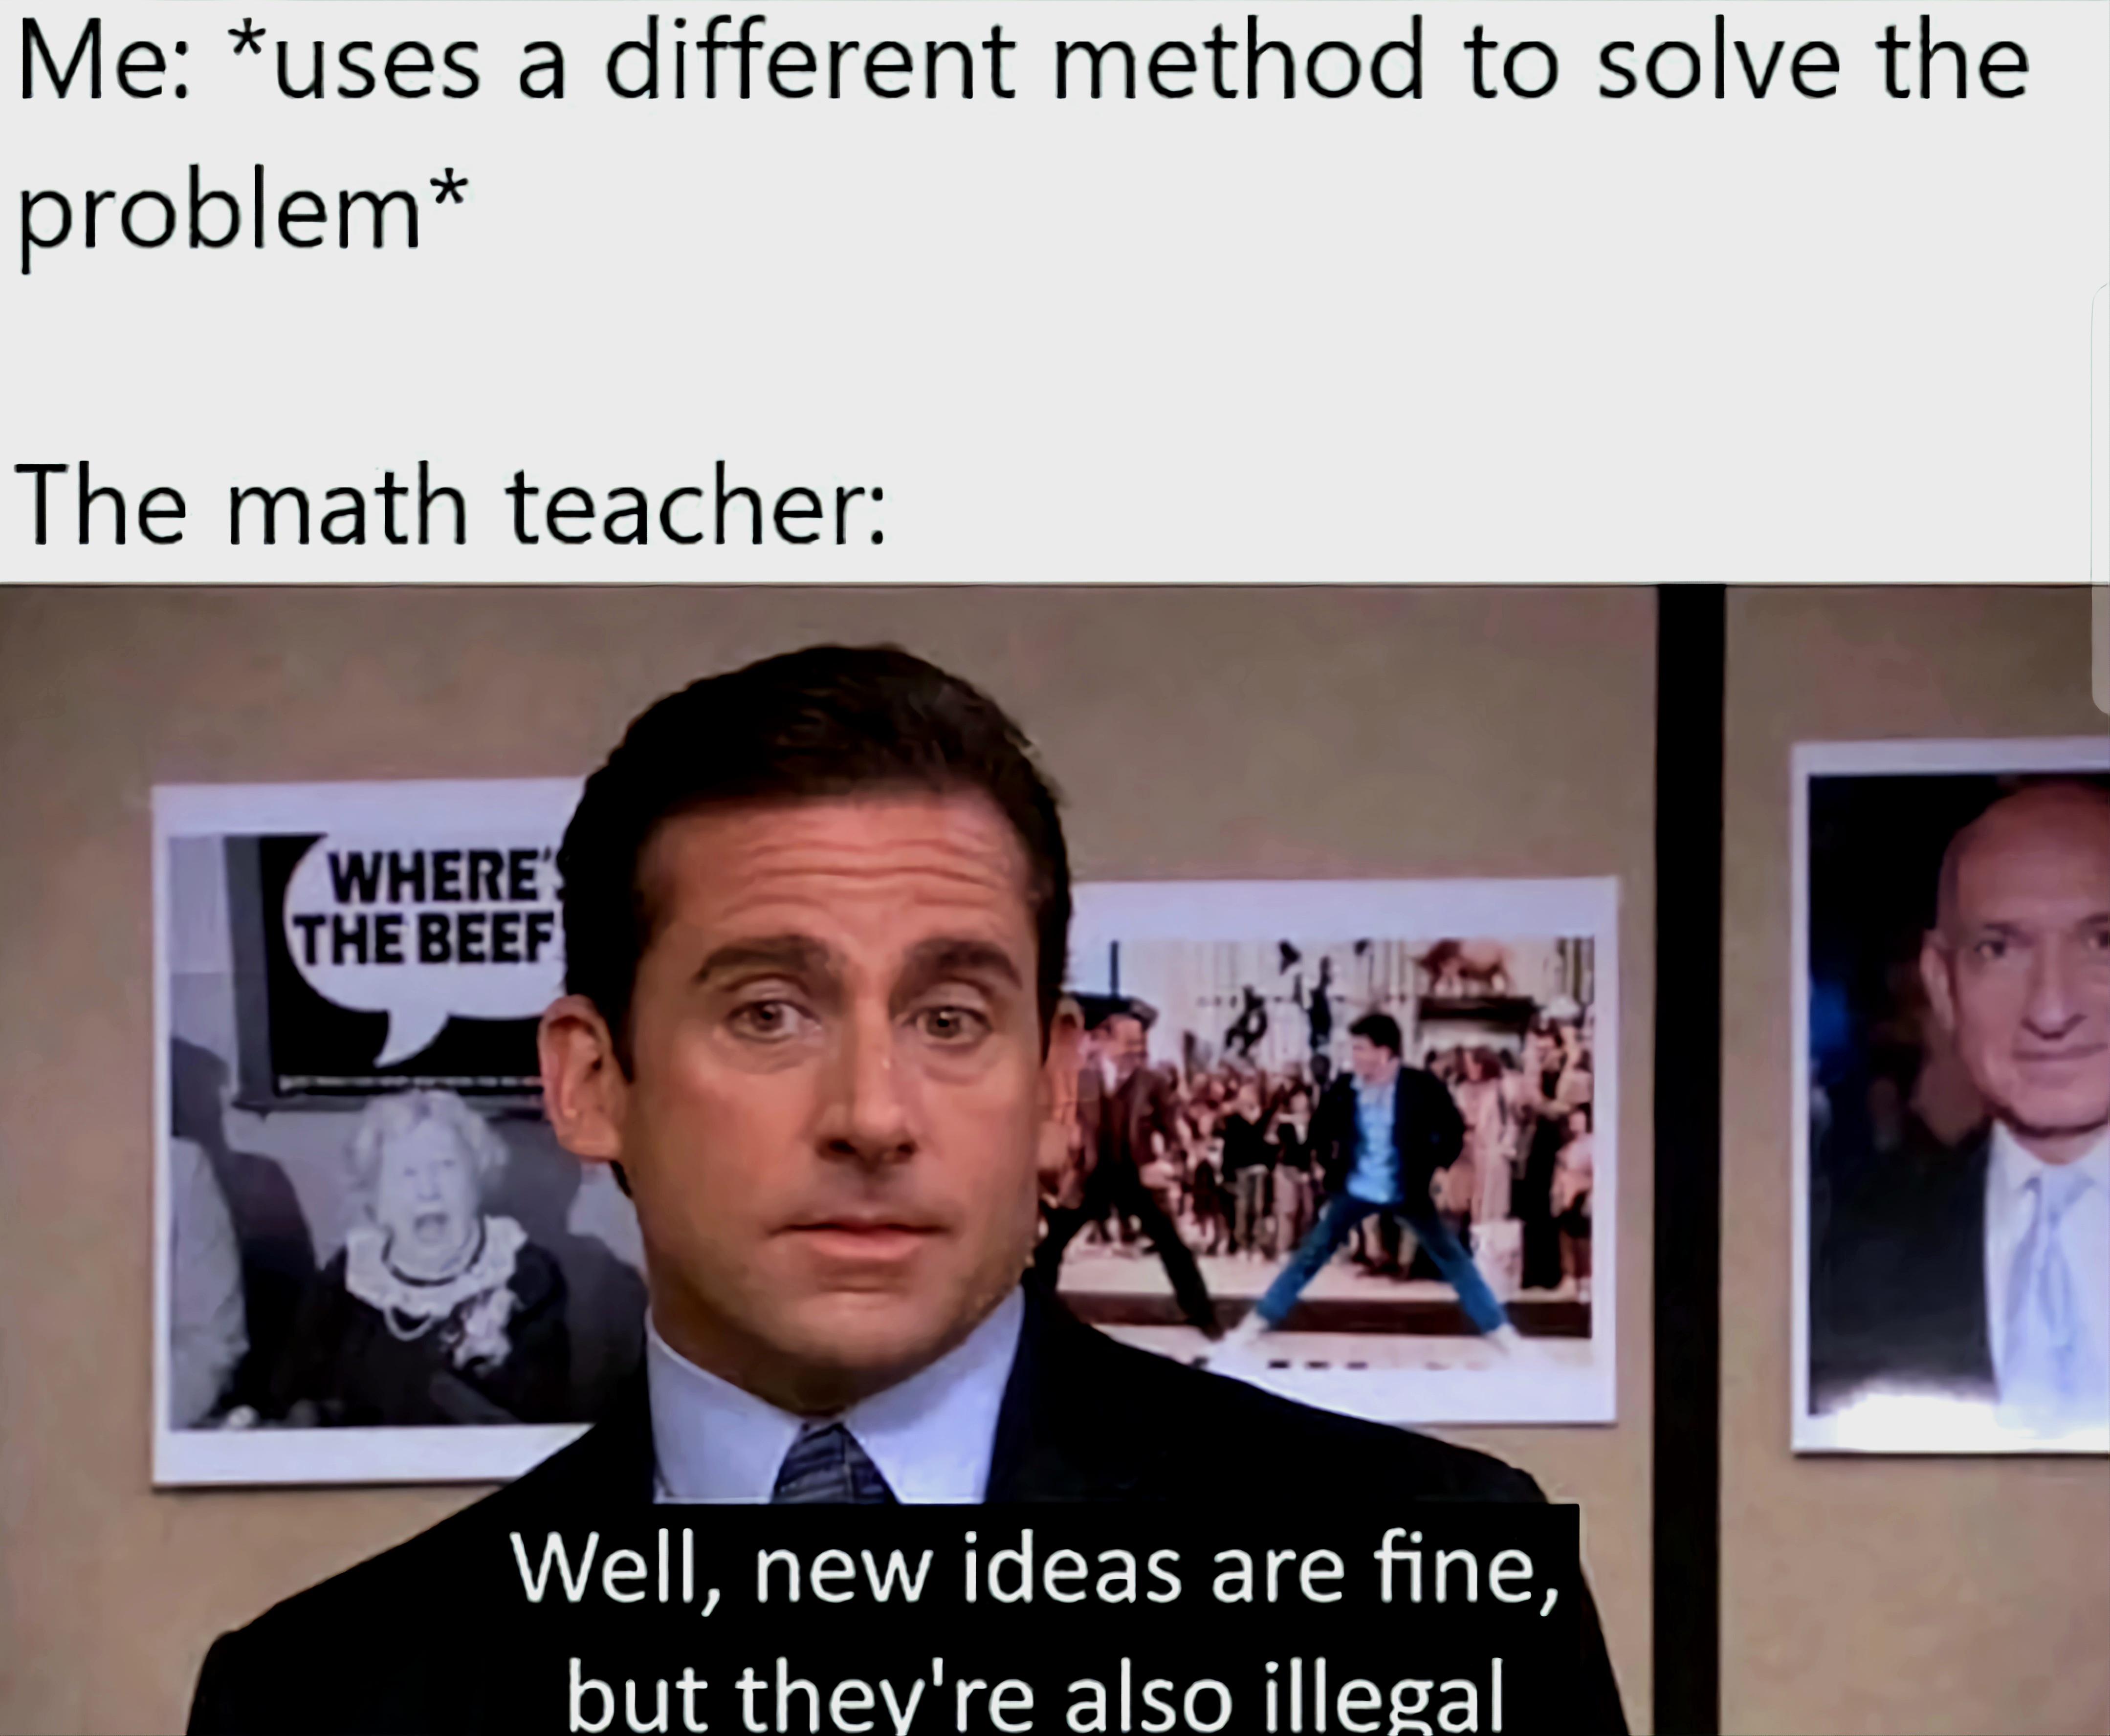 funny memes - presentation - Me uses a different method to solve the problem The math teacher Where The Beef Well, new ideas are fine, but they're also illegal